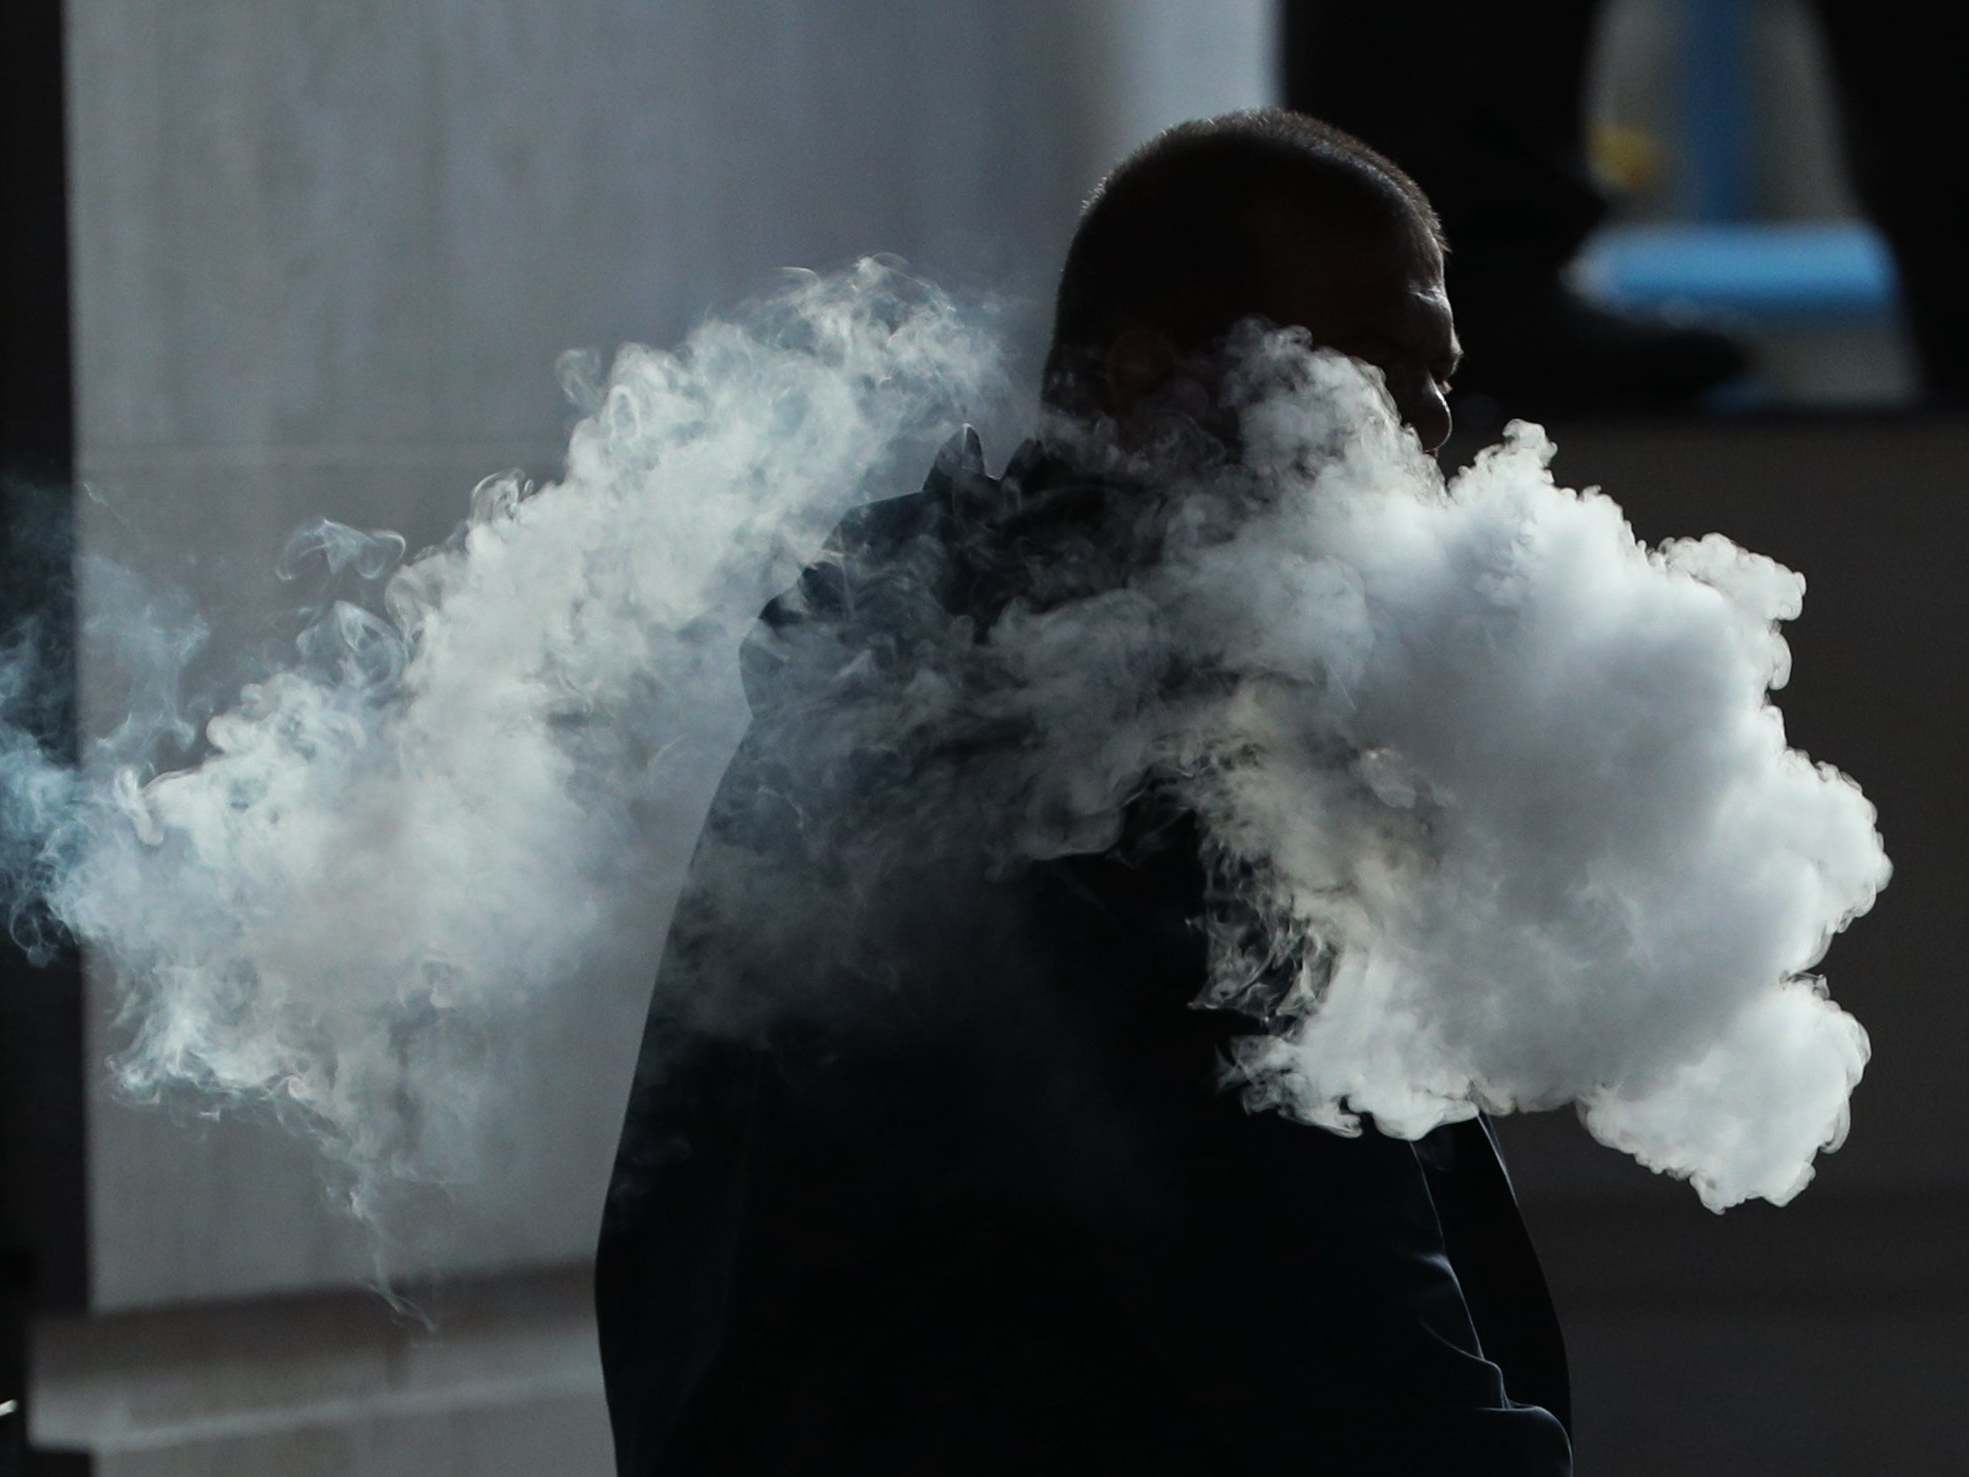 Around 31 per cent of vapers are former smokers.